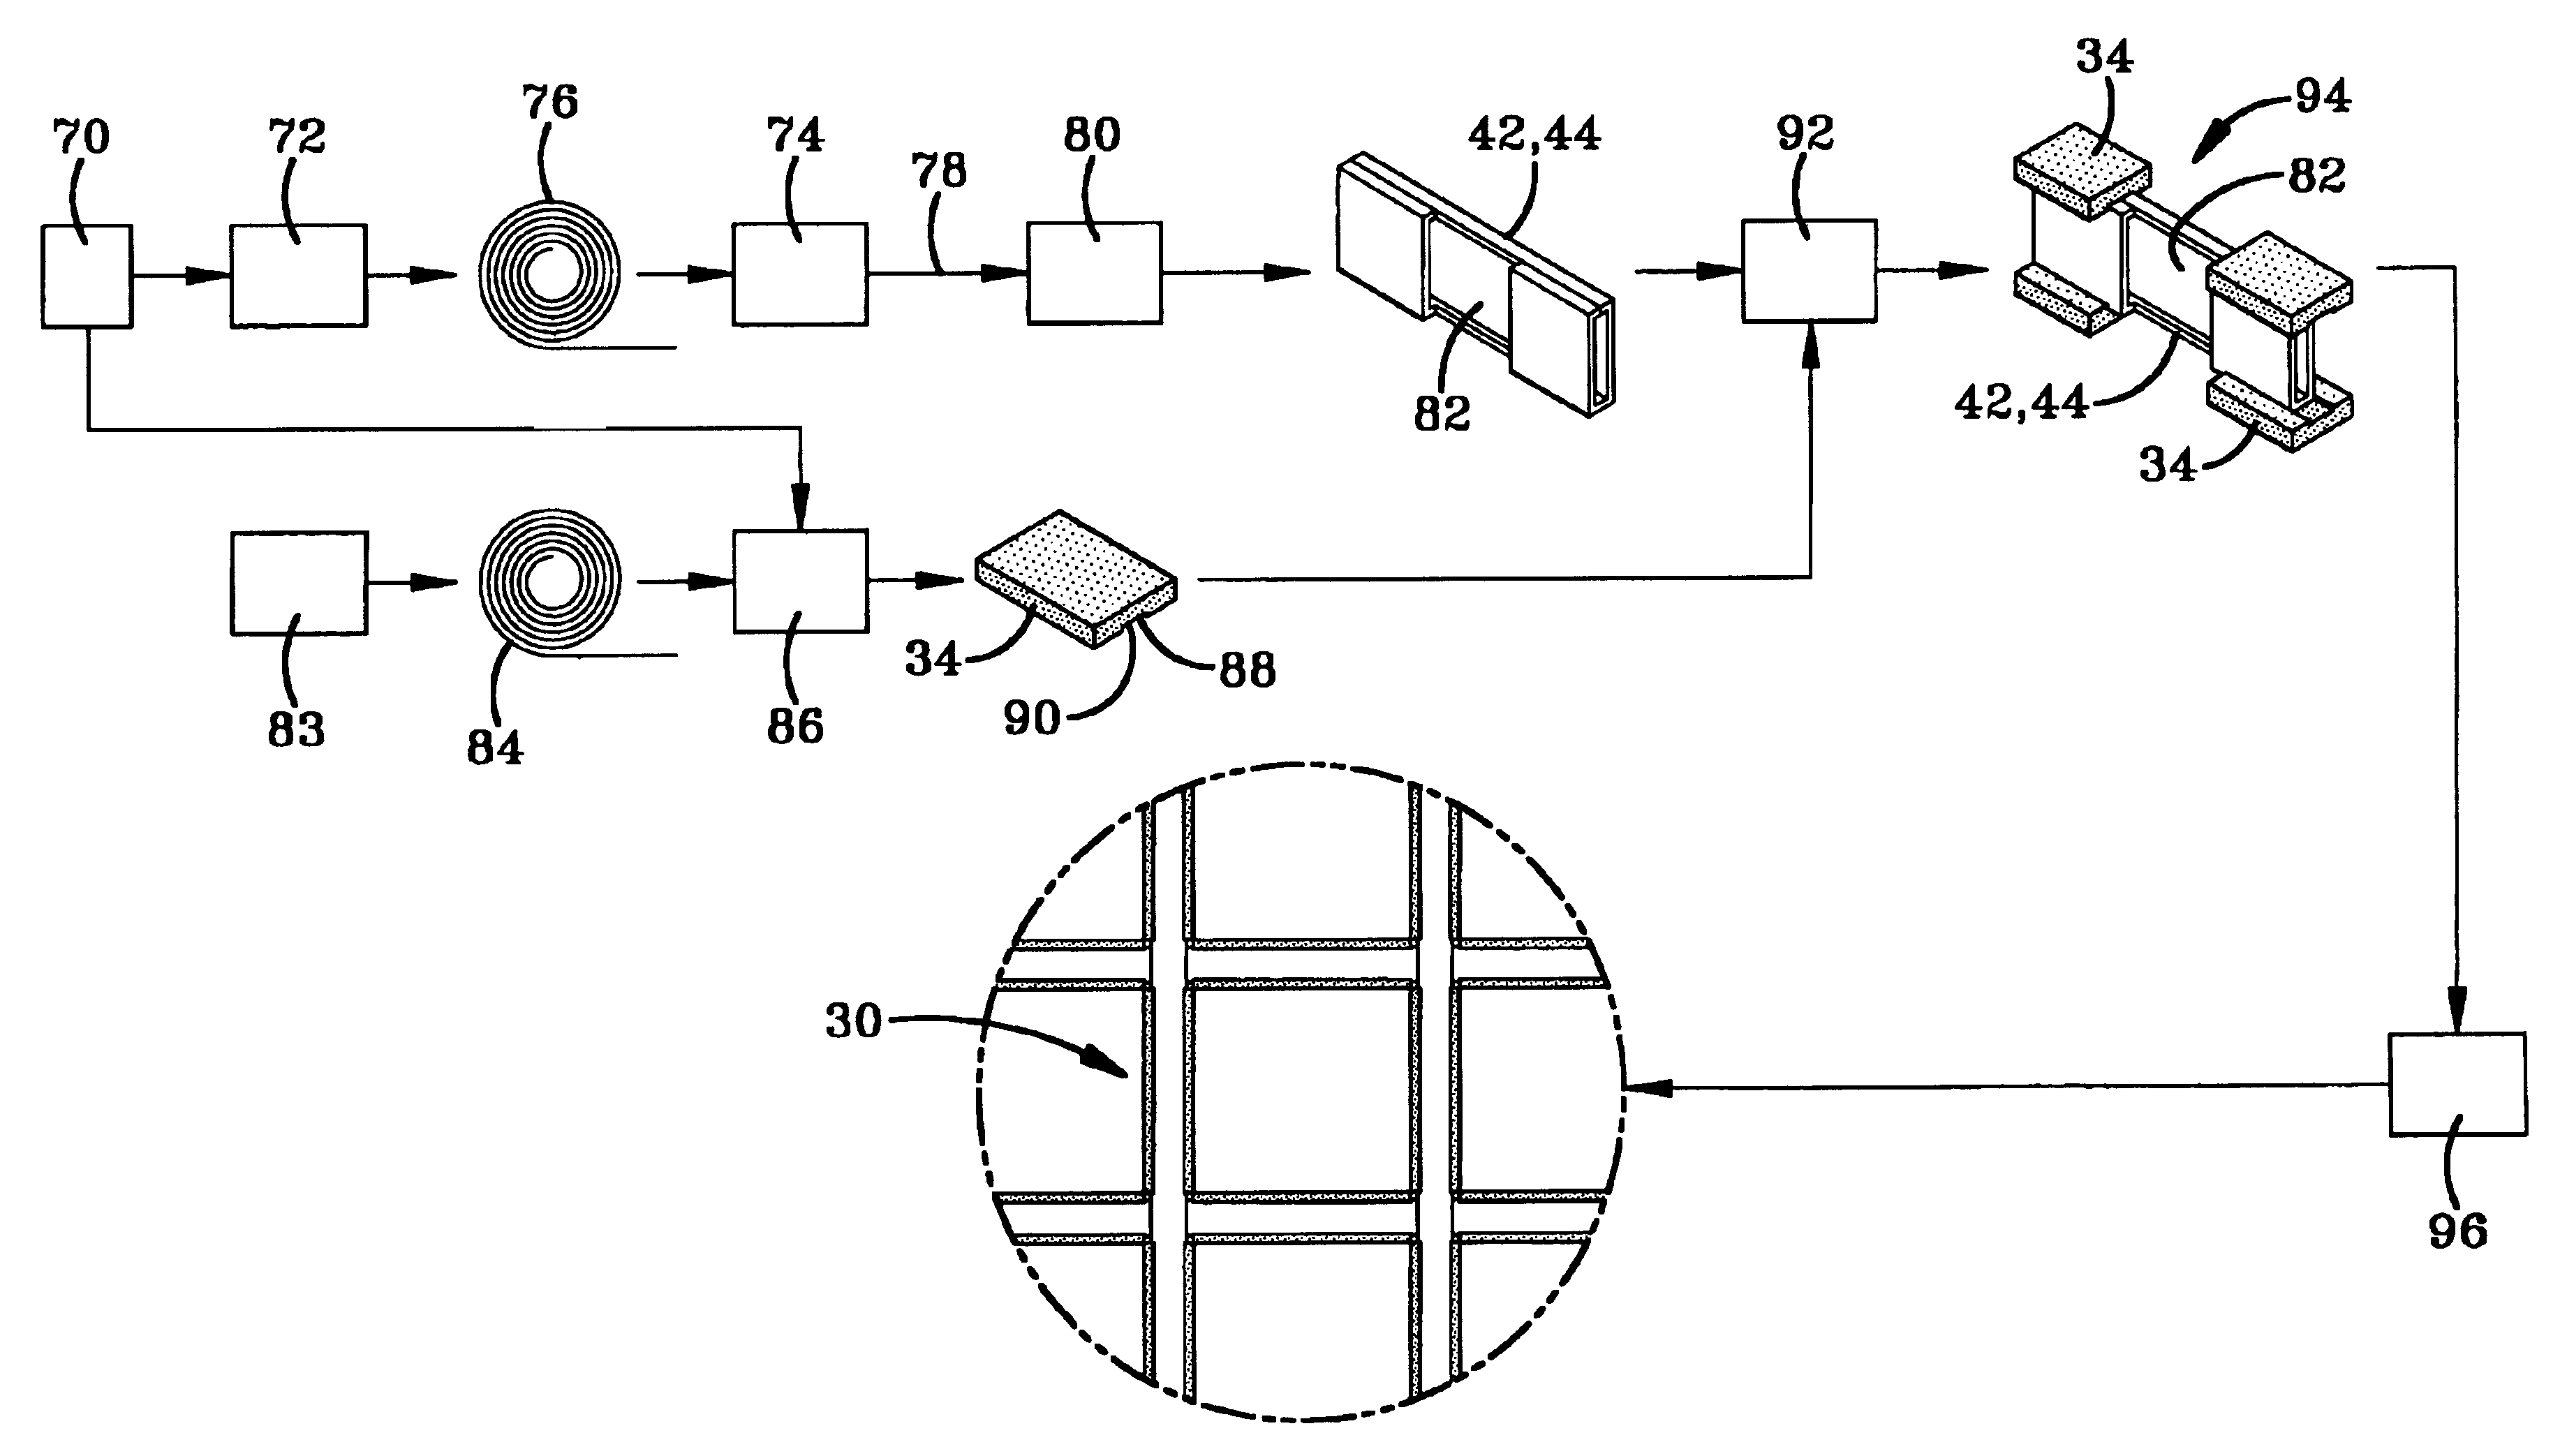 Method of fabricating muntin bars for simulated divided lite windows